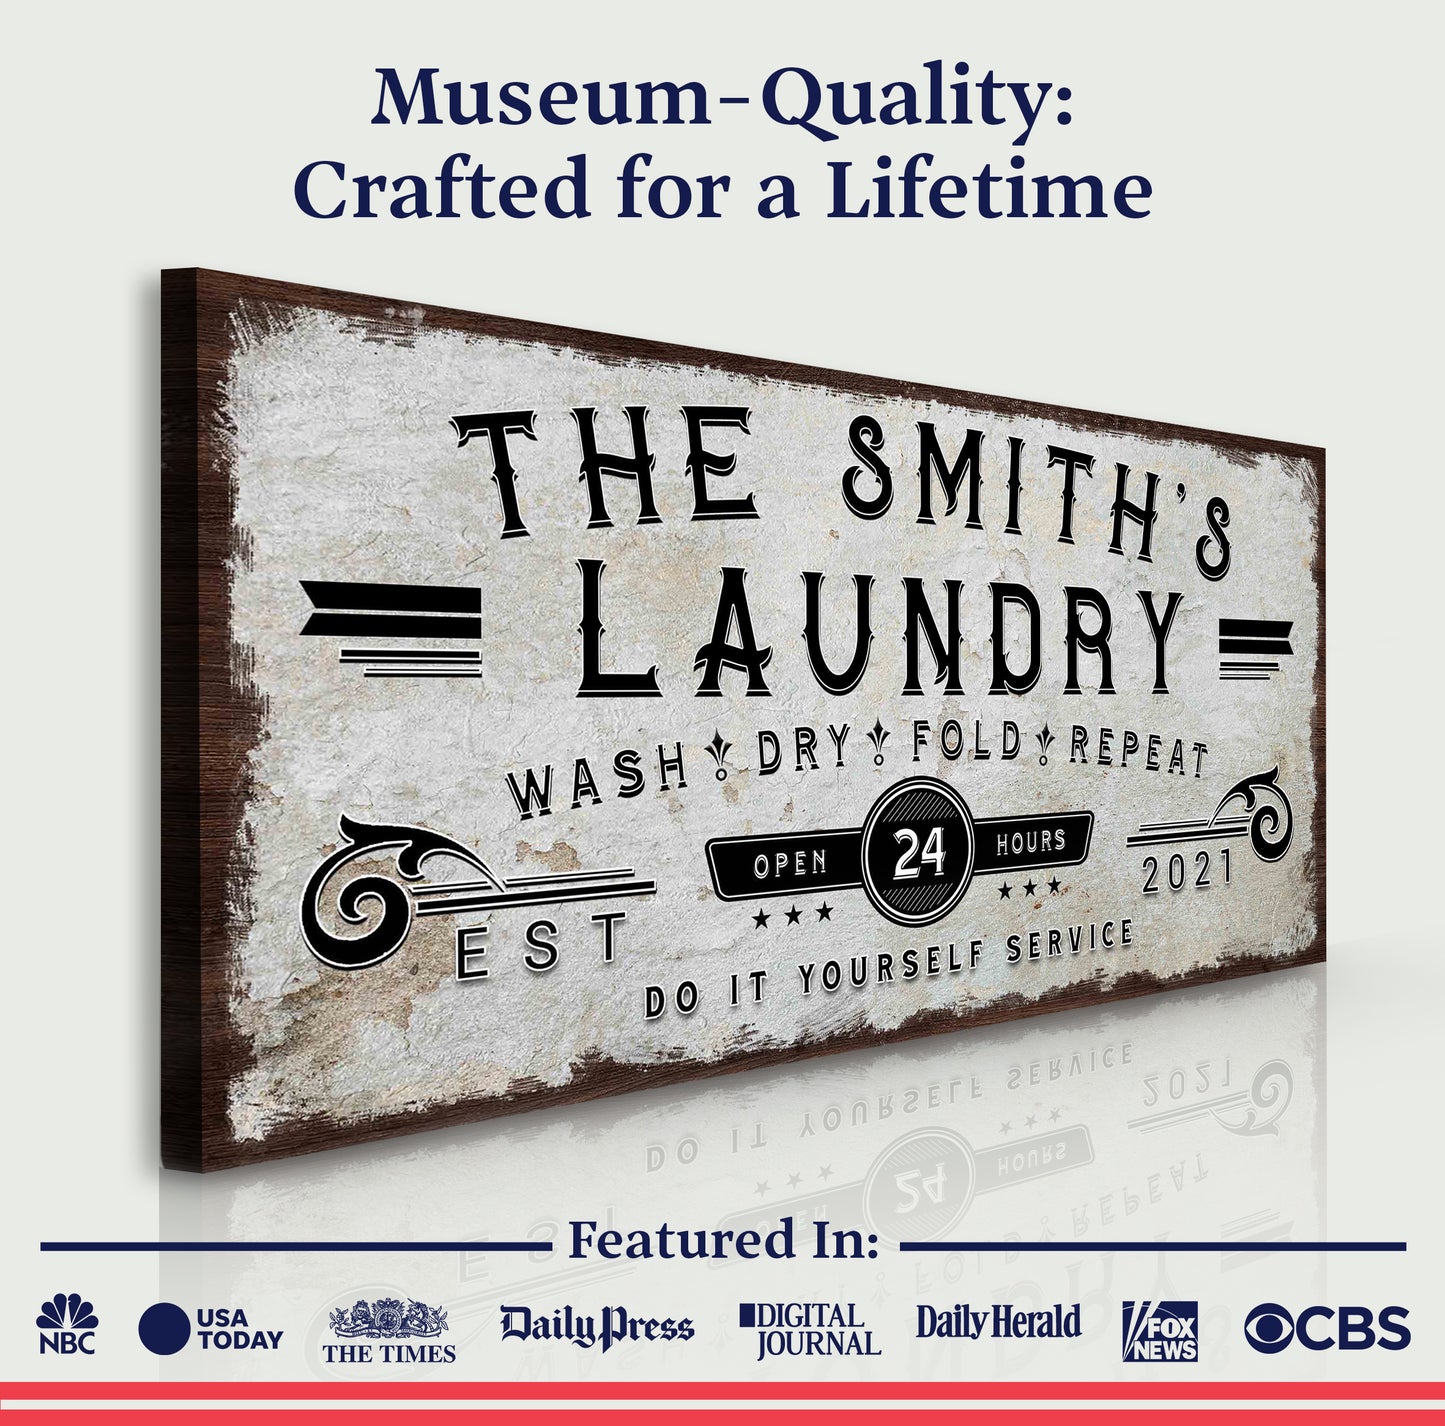 Personalized Laundry Room Sign (Free Shipping)